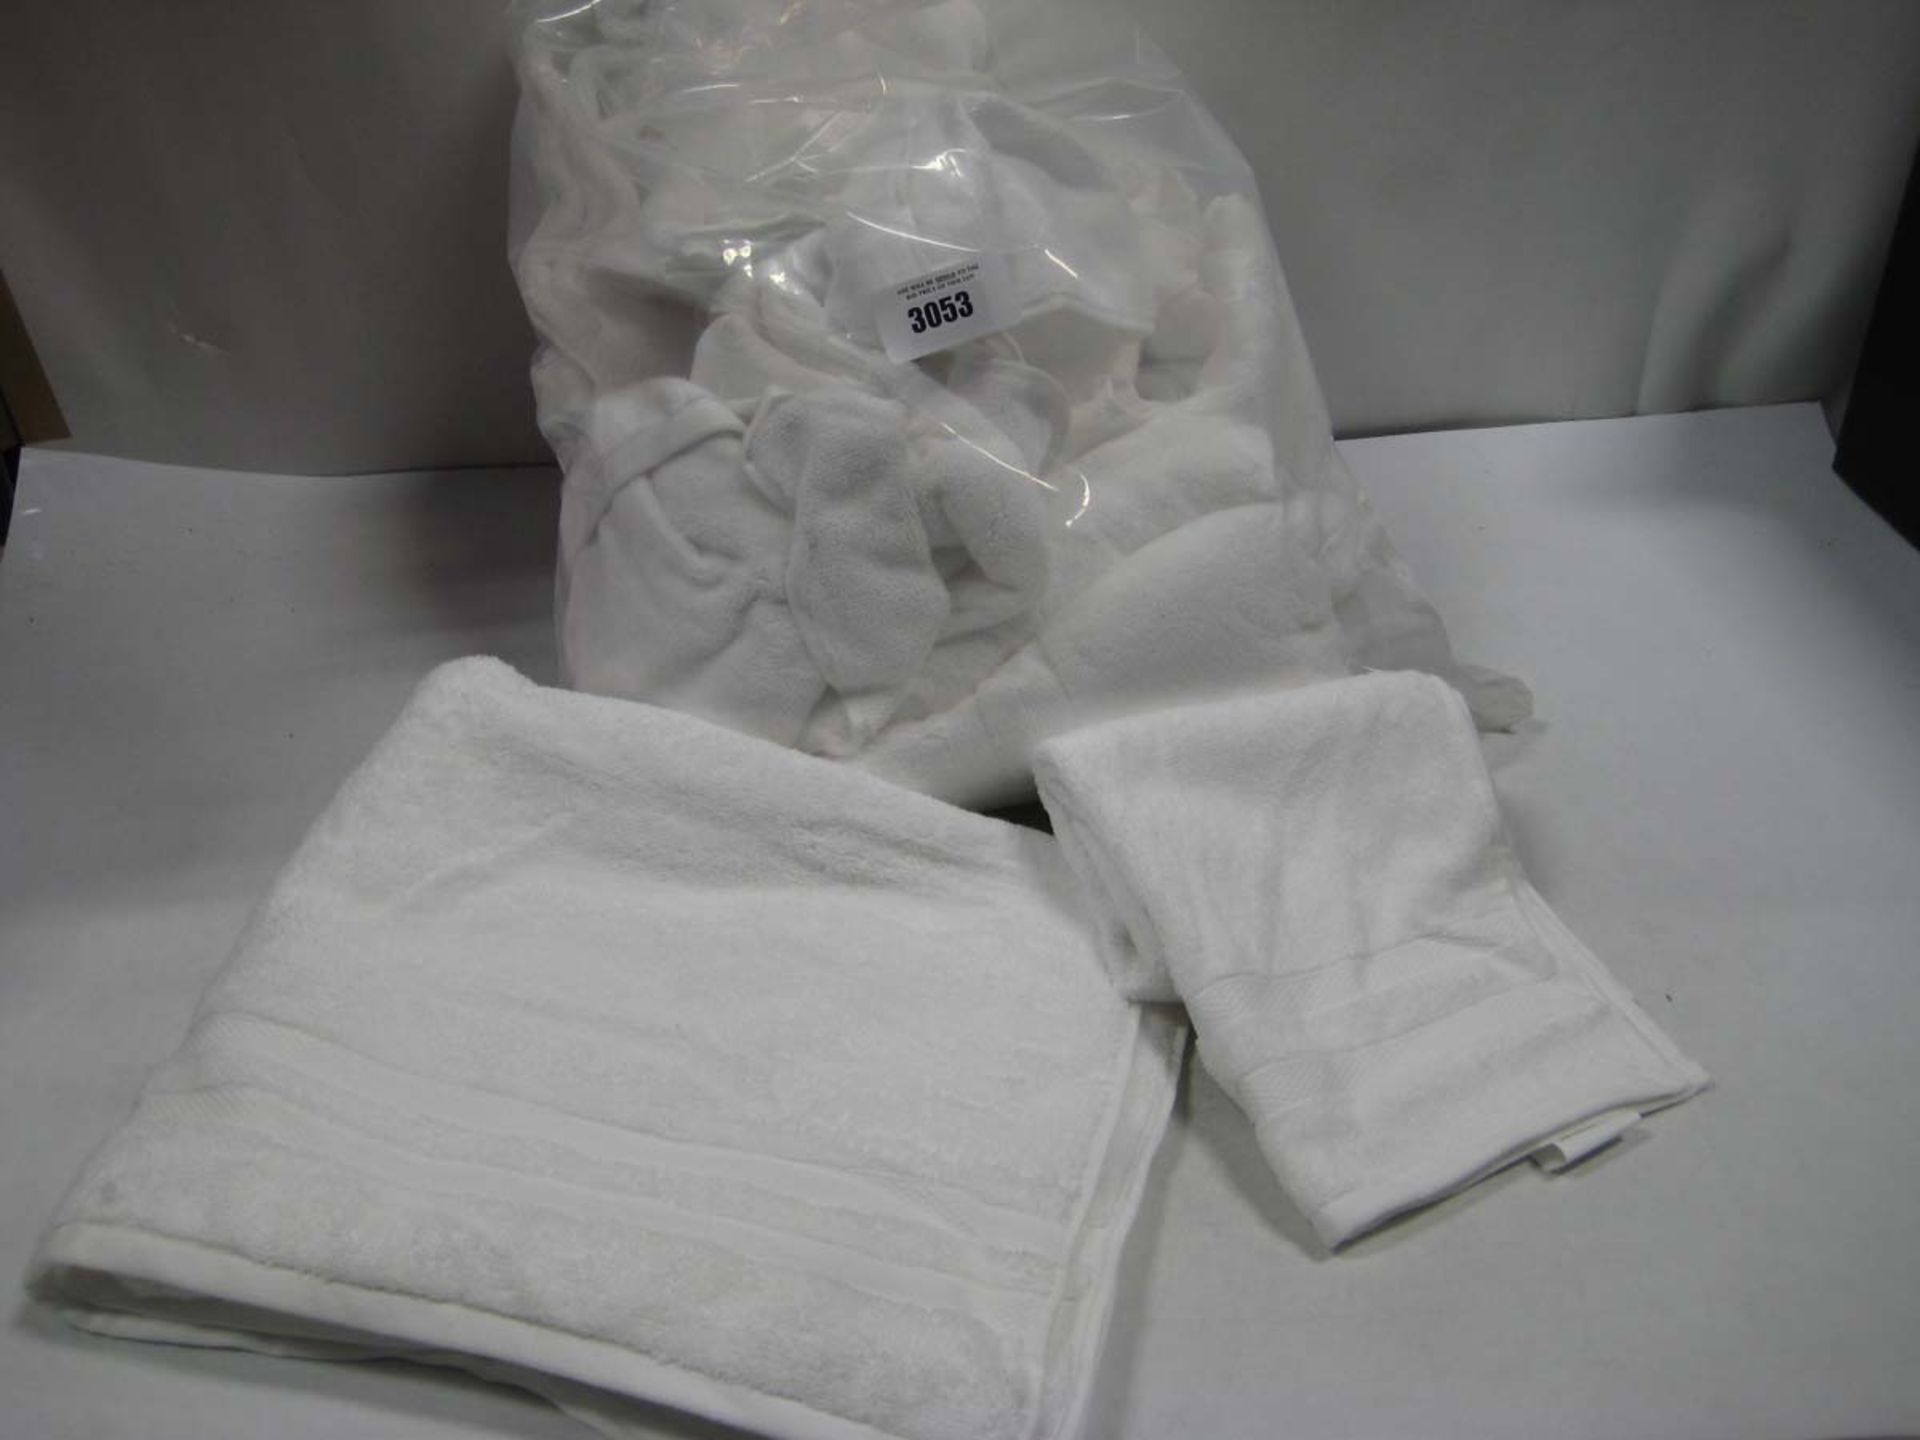 Bag containing white towels